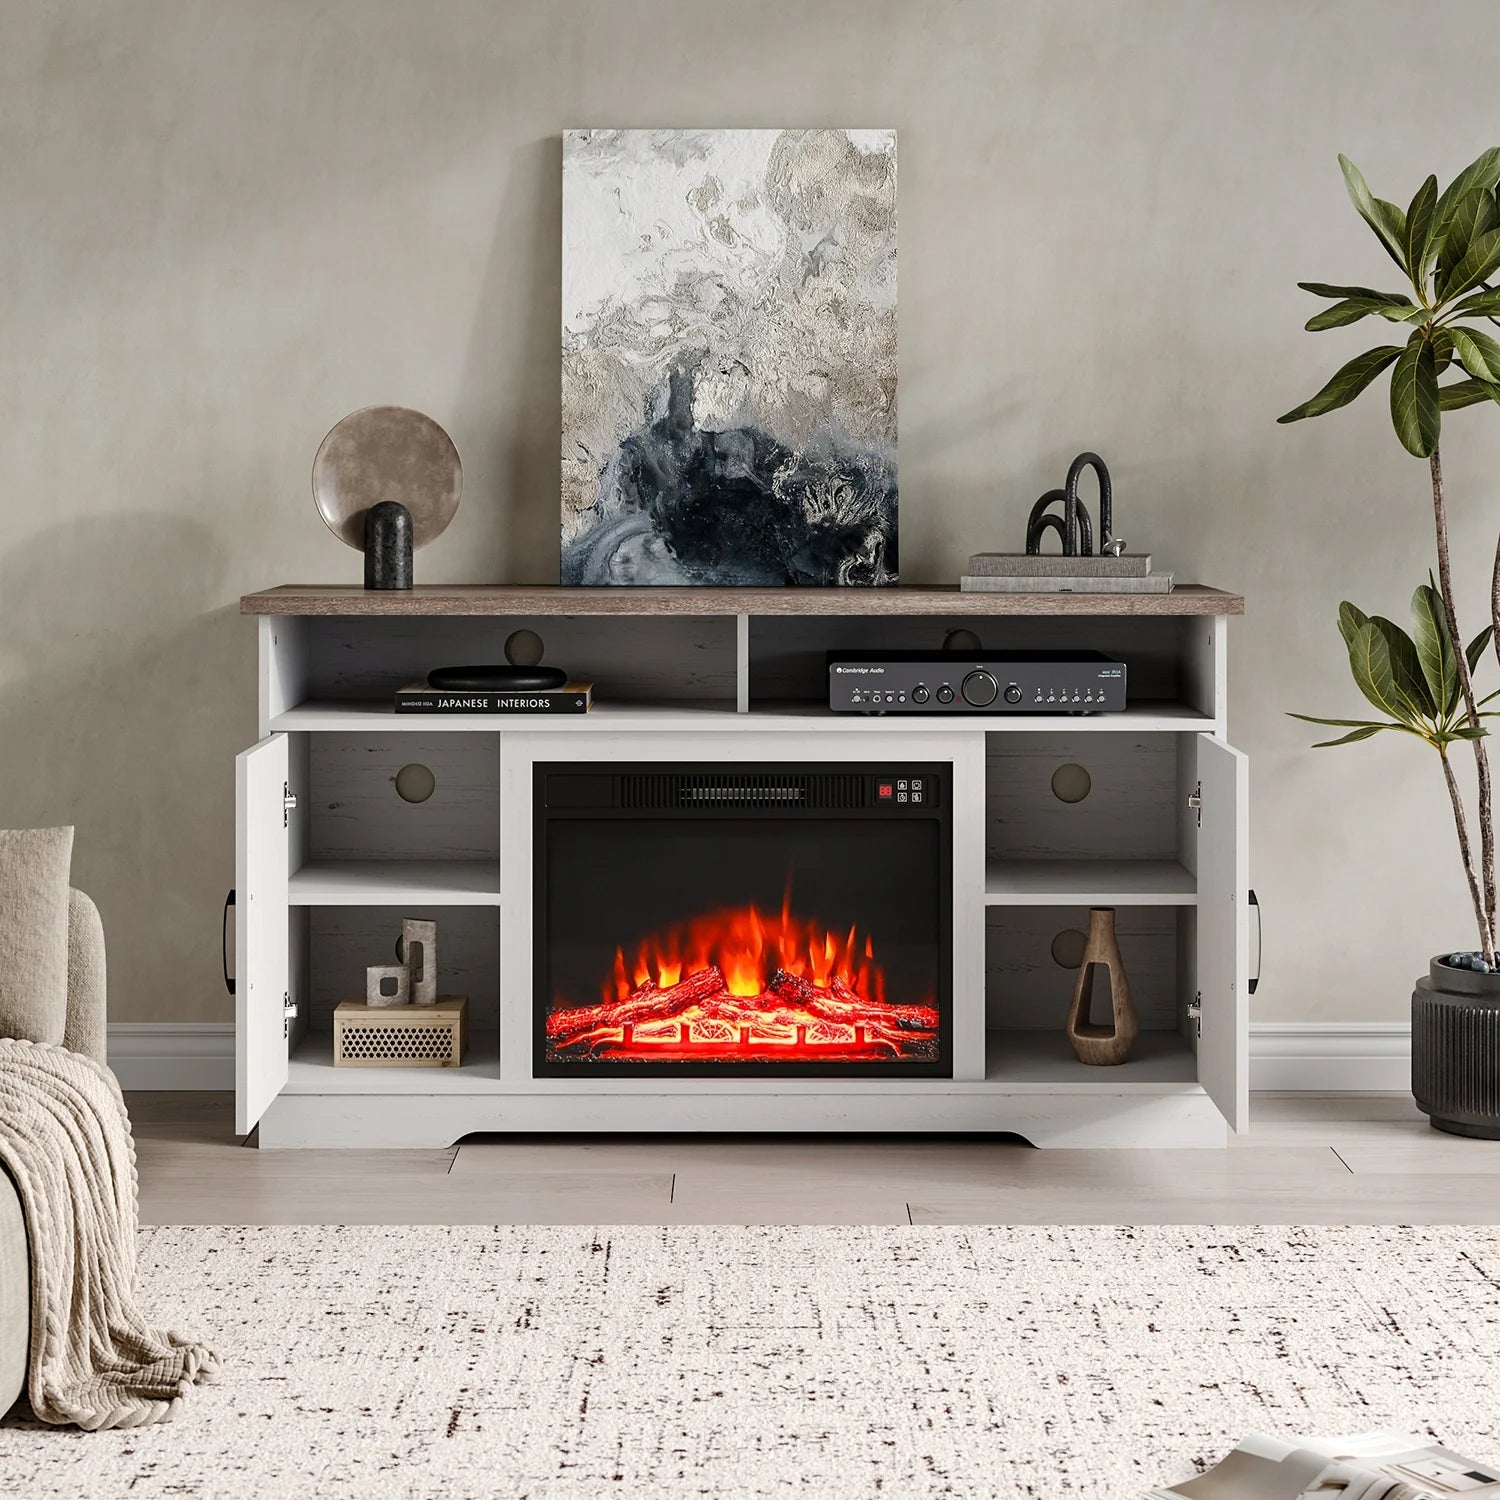 138cm W Recessed Electric Fireplace TV Stand 4 Flame Colors Freestanding Fireplaces Freestanding Fireplaces Living and Home 